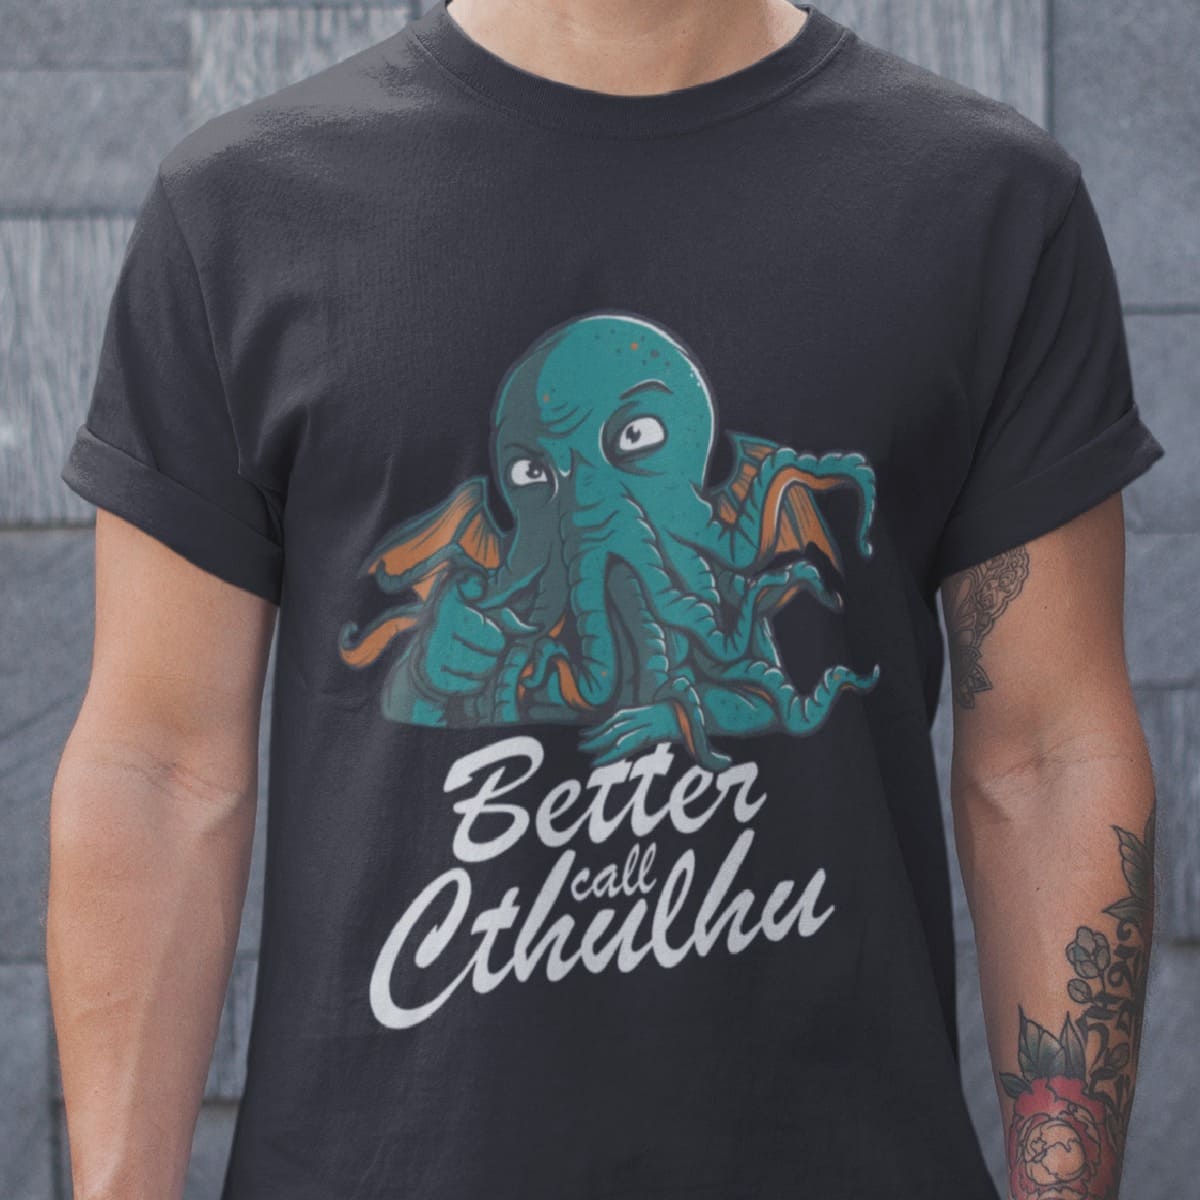 Better call Cthulhu - Octopus monster, The call of Cthulhu